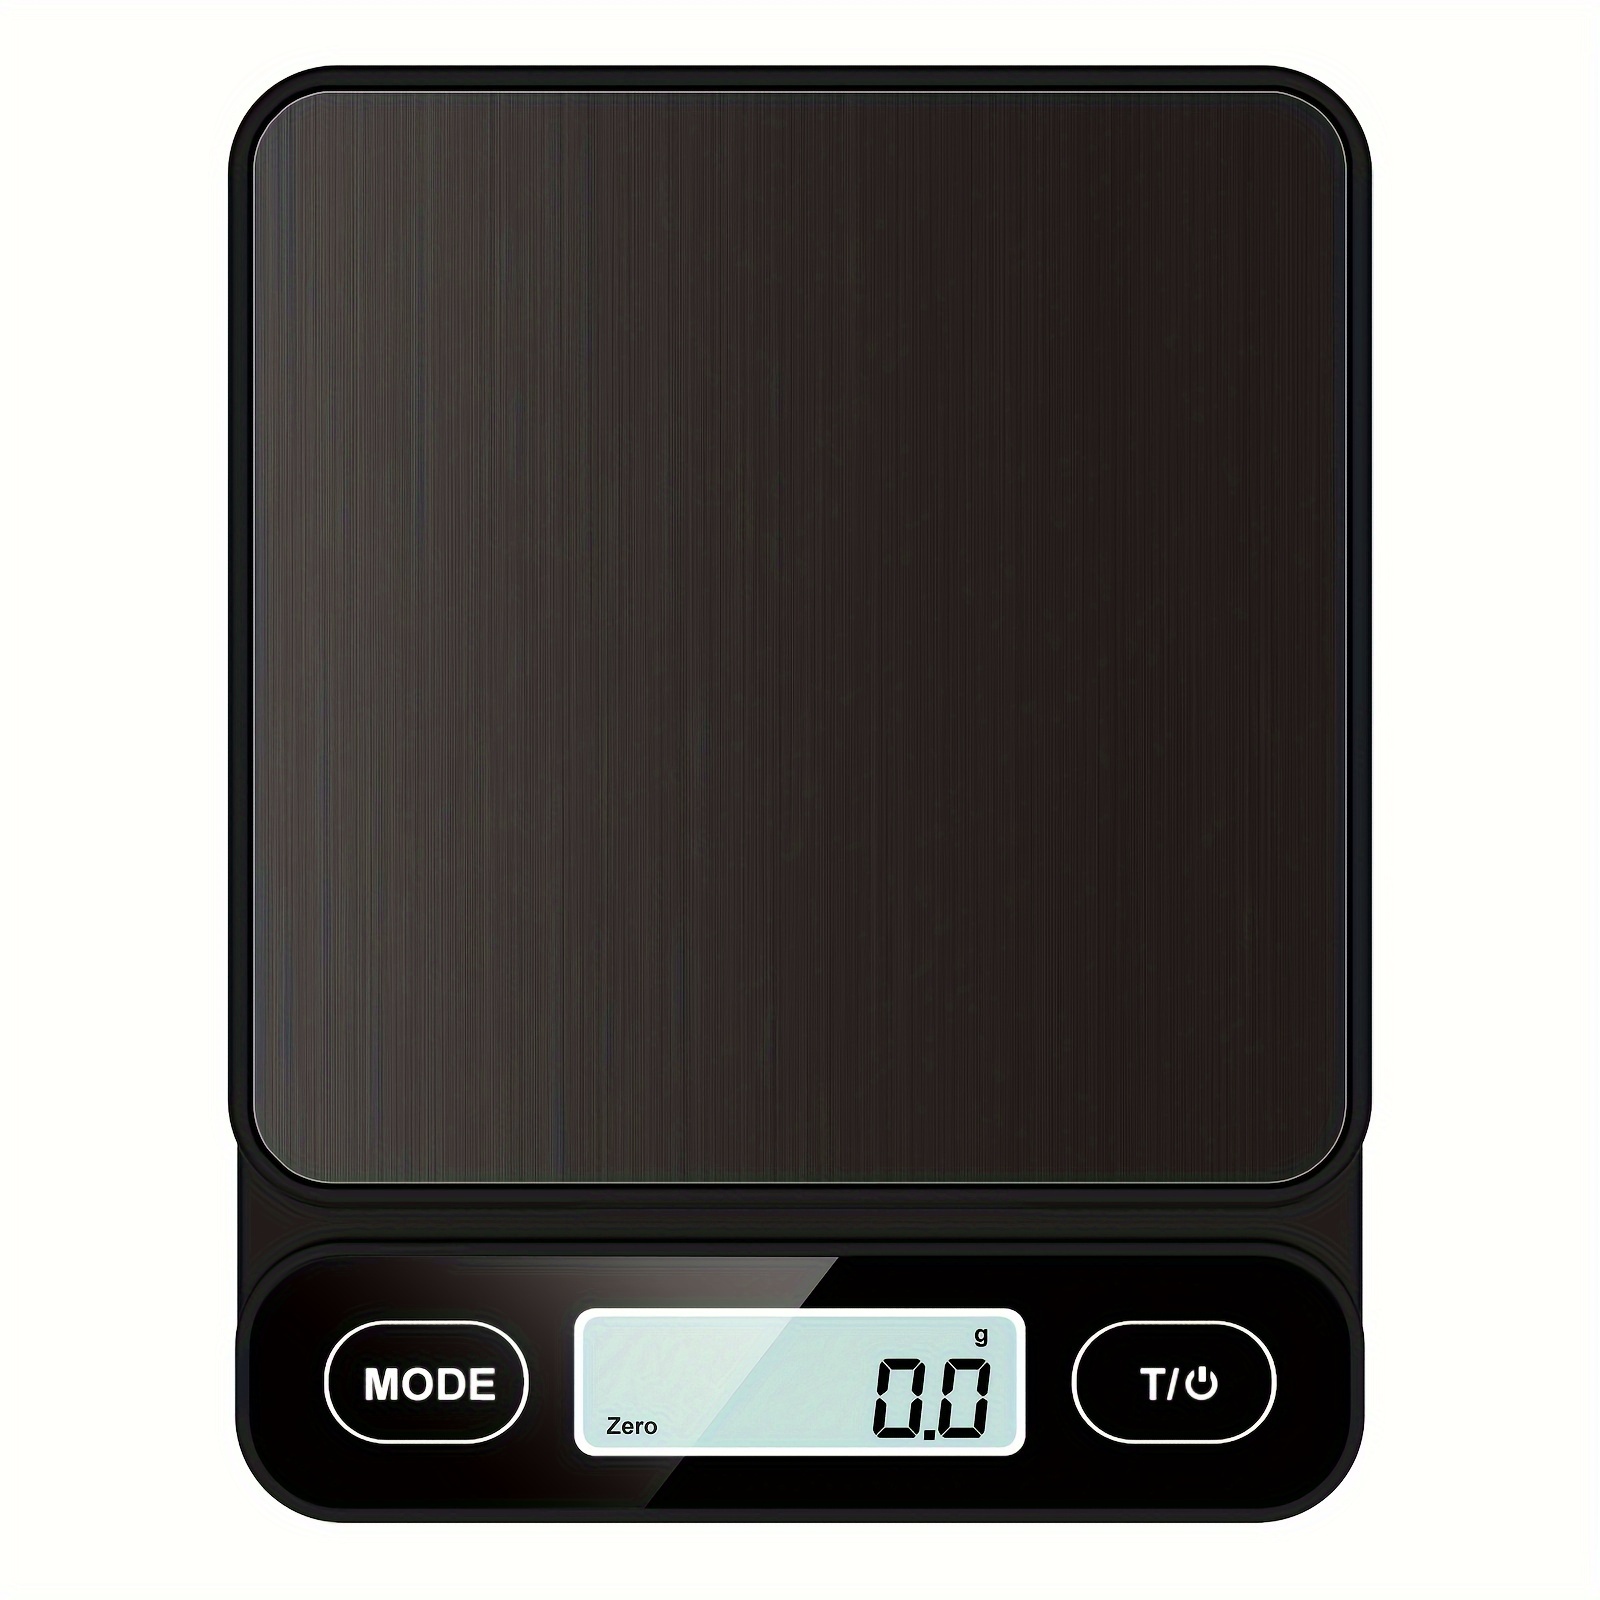 Food Scale, 500g by 0.01g Precise Digital Kitchen Scale Gram